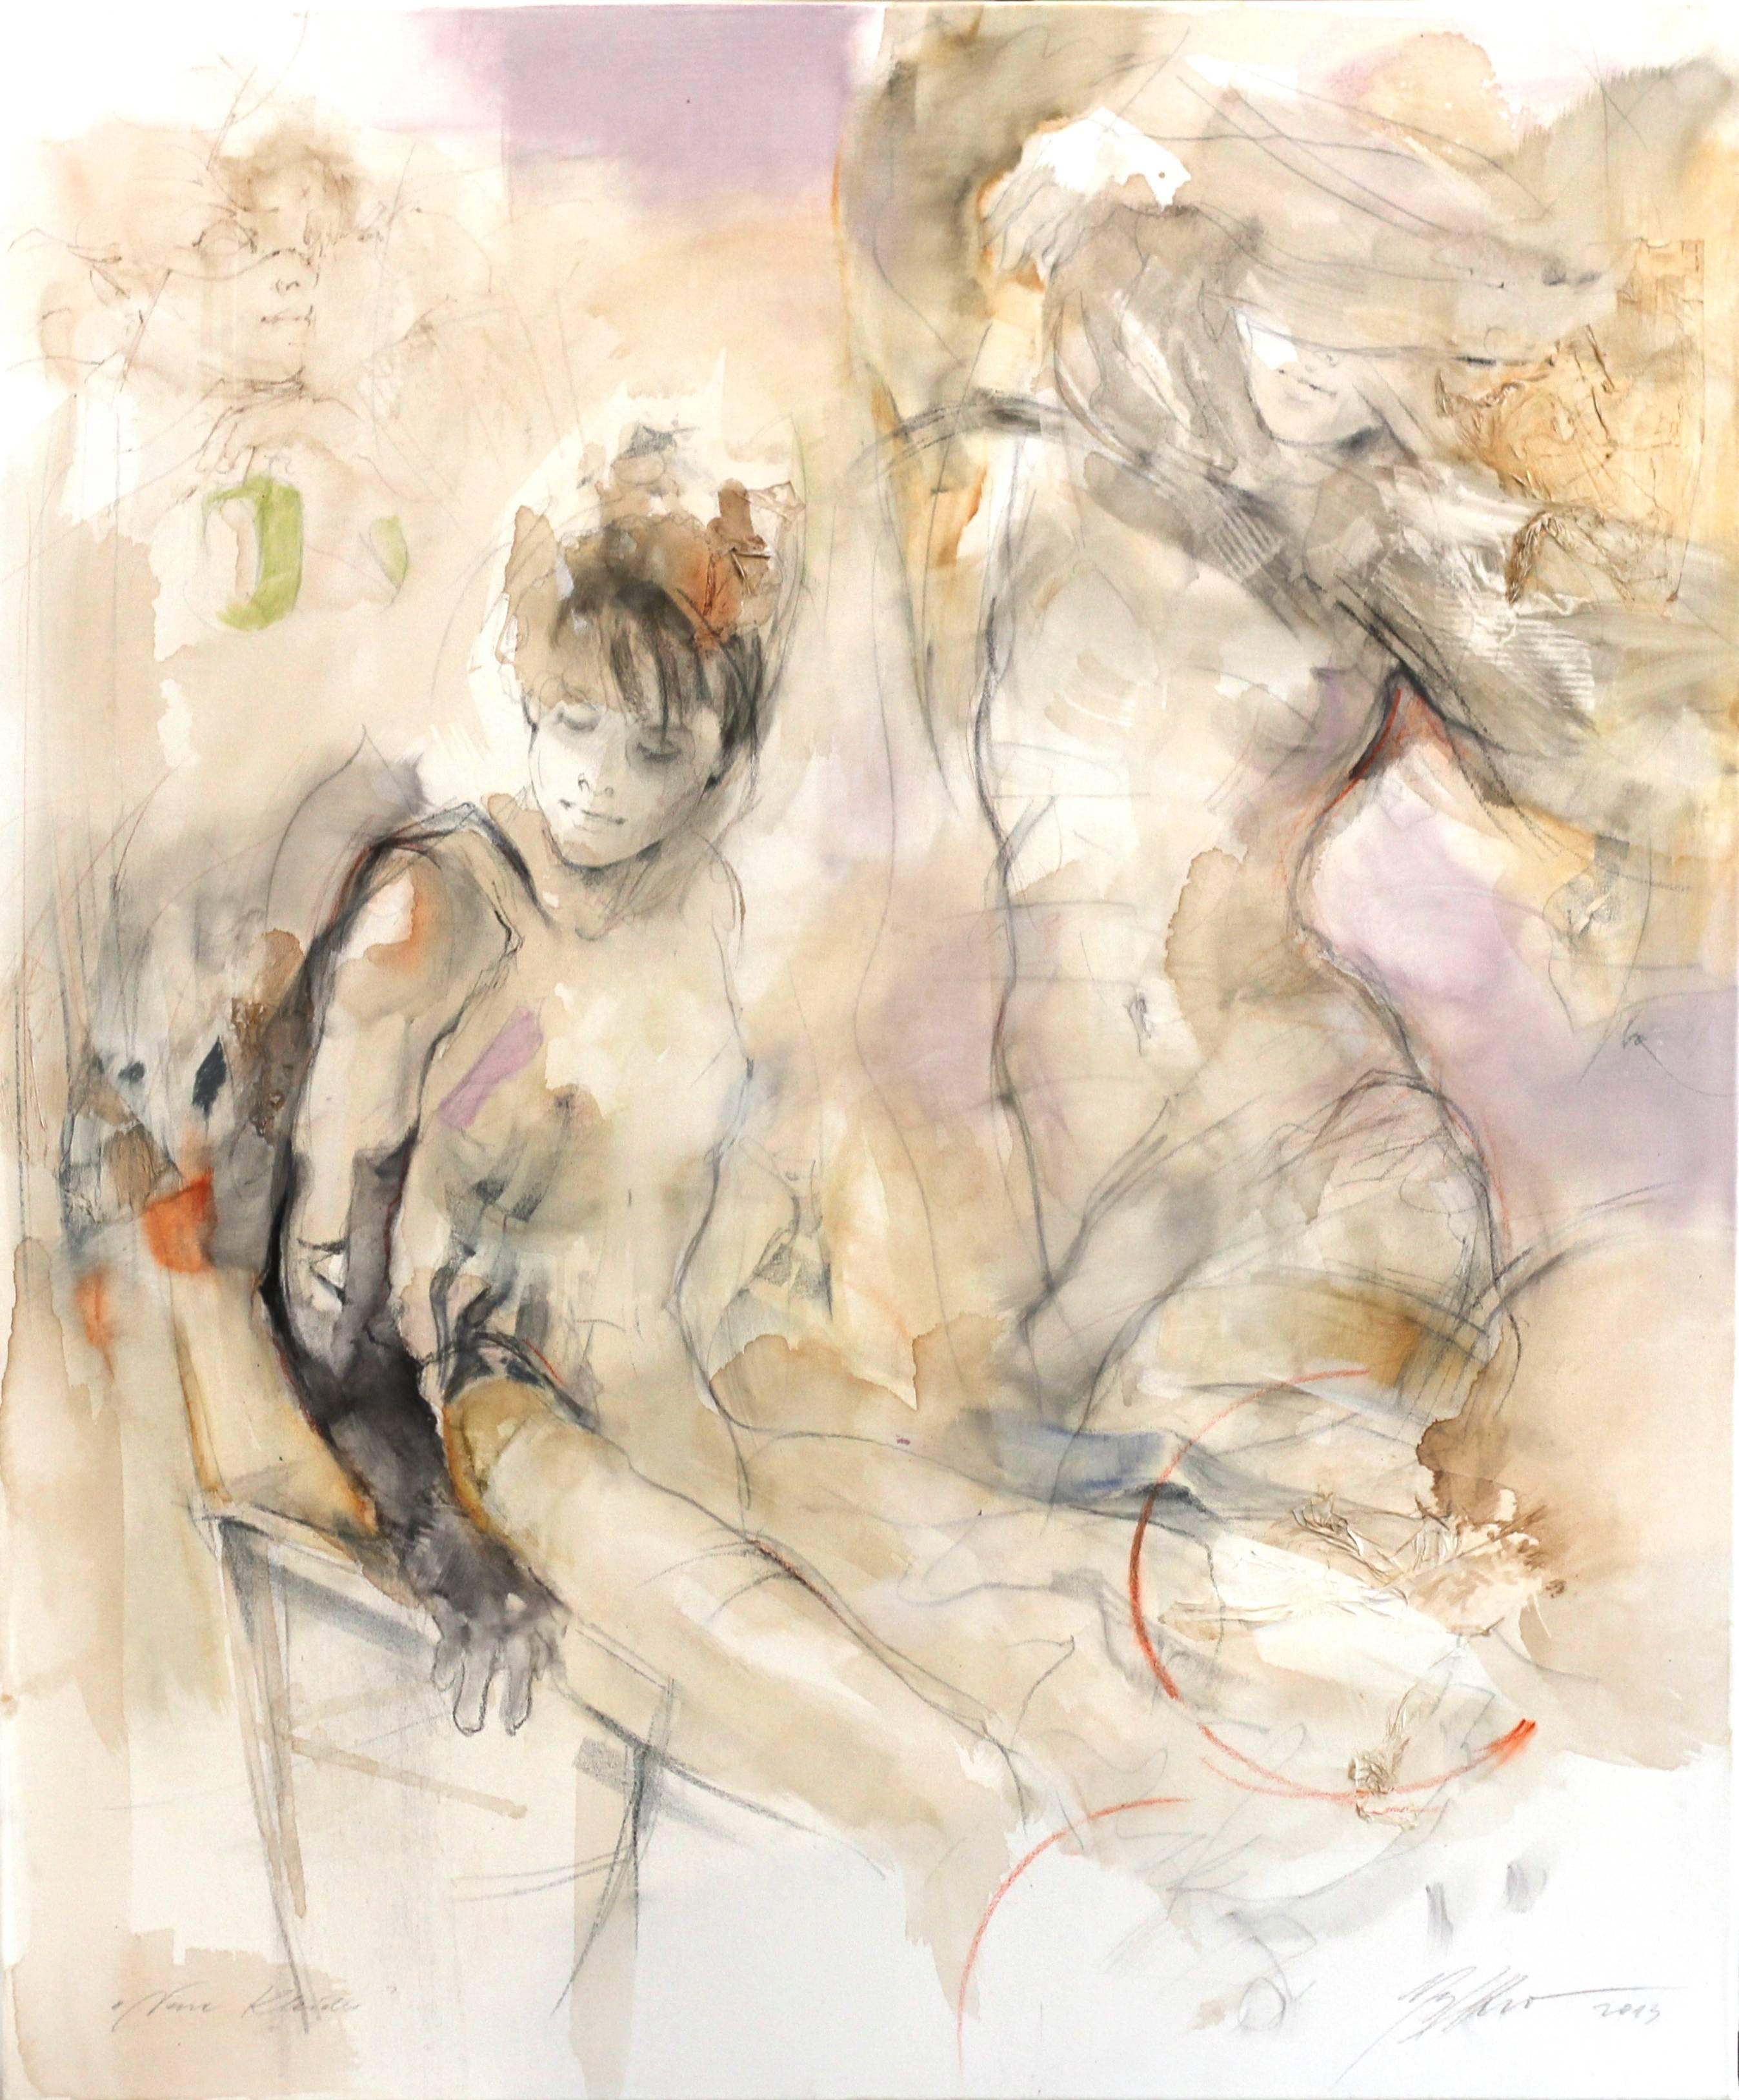 Gabriele Mierzwa Figurative Painting - New Dresses - Soft Toned Sensitive Portrayal of Intimate Figures Graceful Nudes